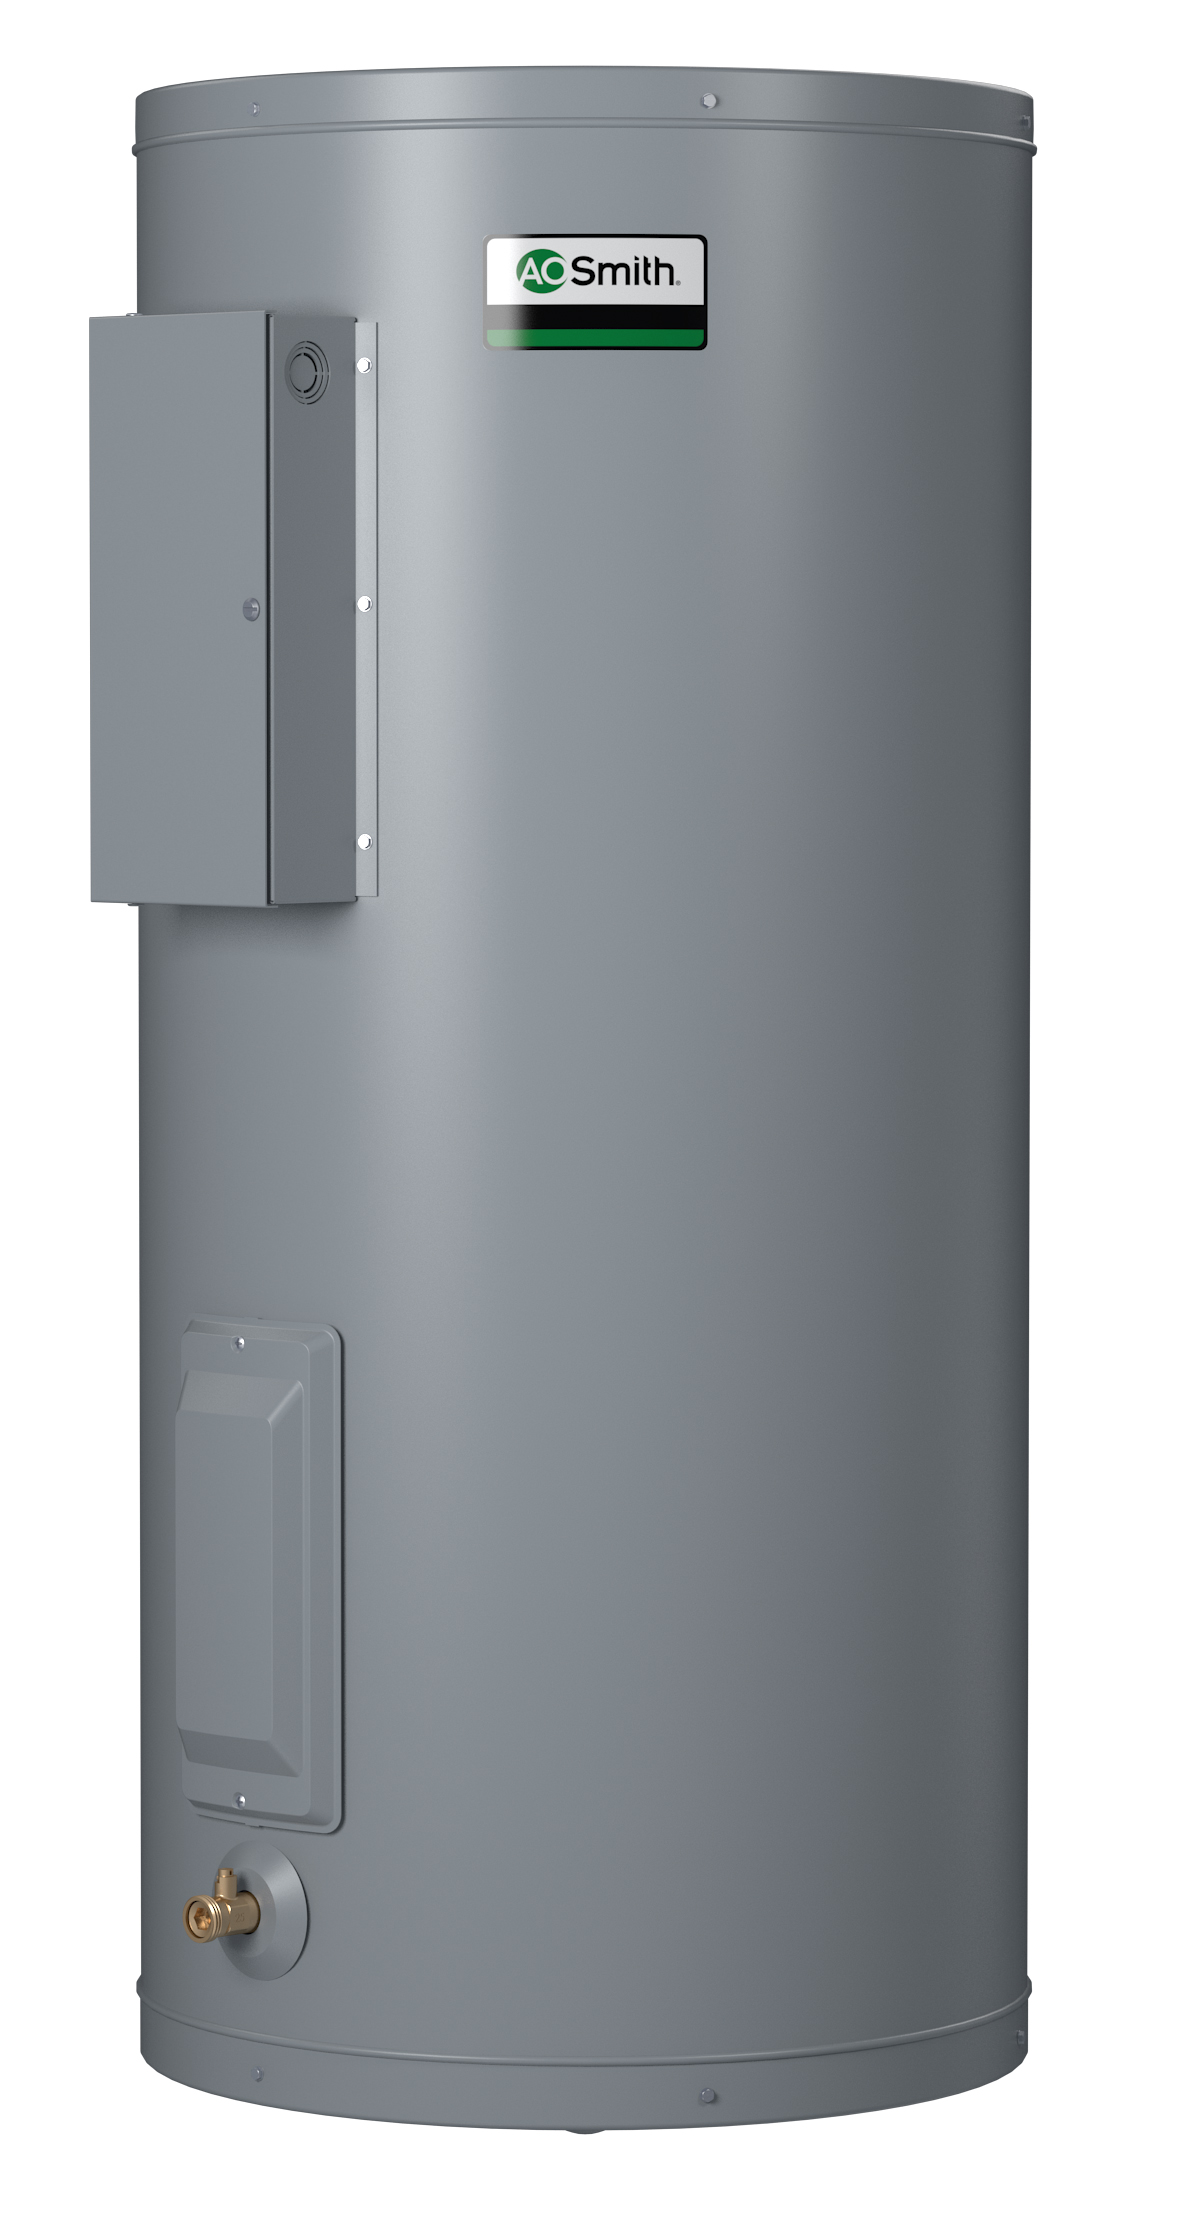 AO SMITH DEN-120D: 120 GALLONS, 1.5KW, 120 VOLT, 1 PHASE, (2-1500 WATT ELEMENTS, NON-SIMULTANEOUS WIRING), DURA-POWER, LIGHT DUTY COMMERCIAL ELECTRIC WATER HEATER